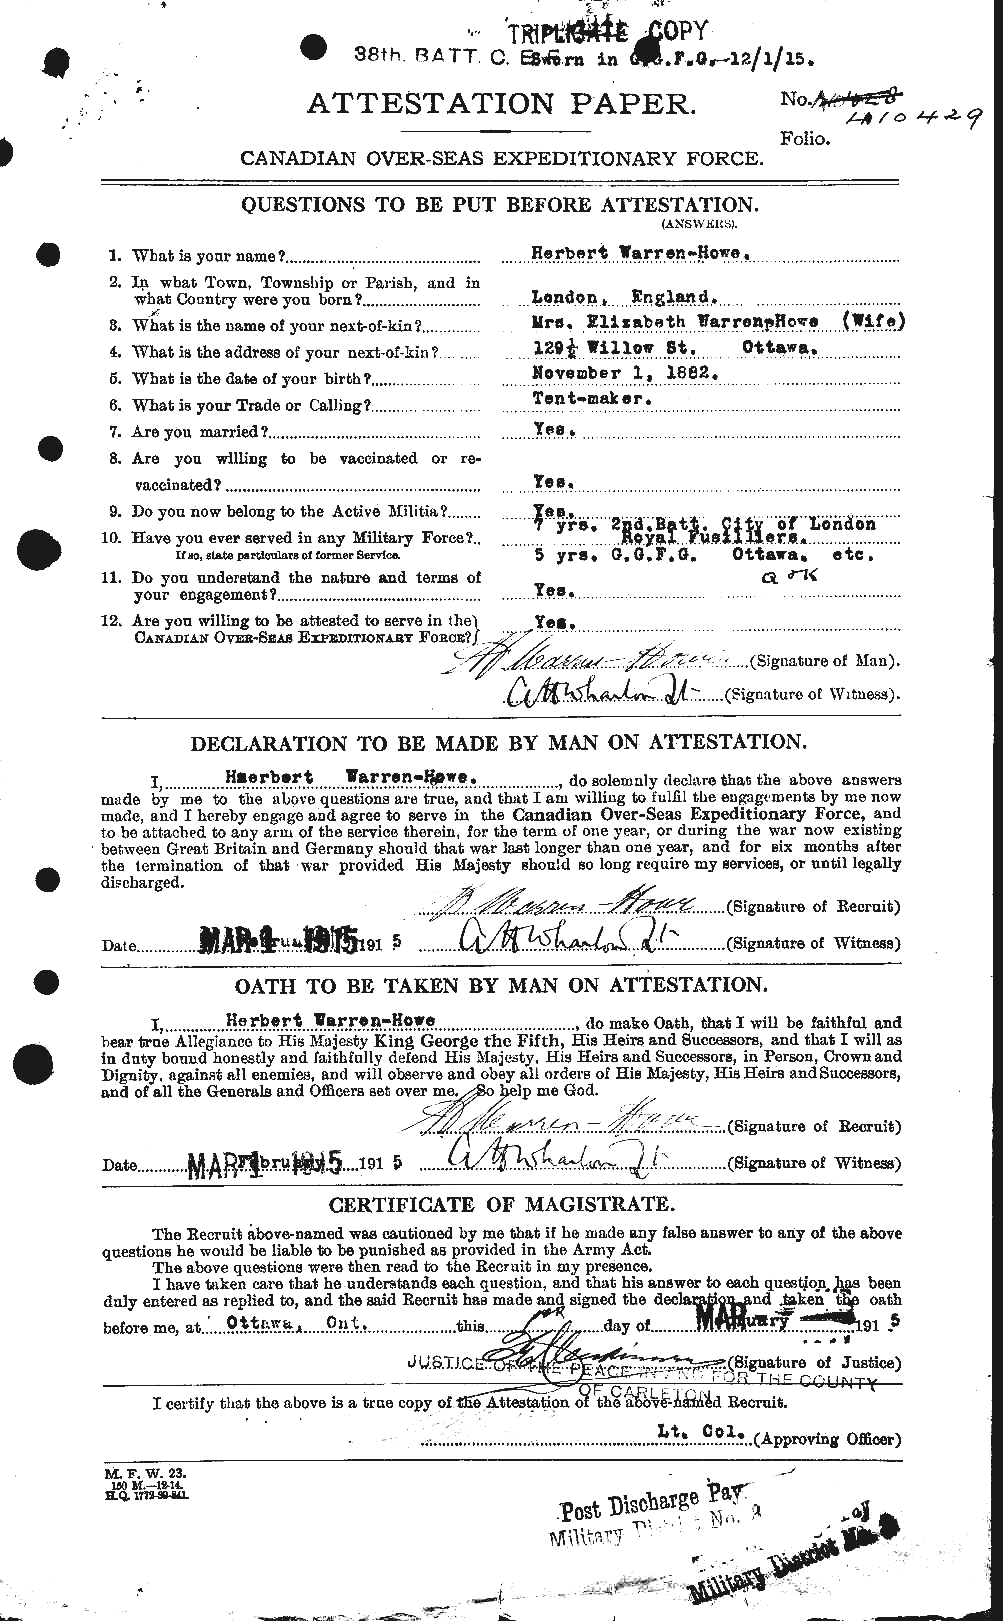 Personnel Records of the First World War - CEF 658700a